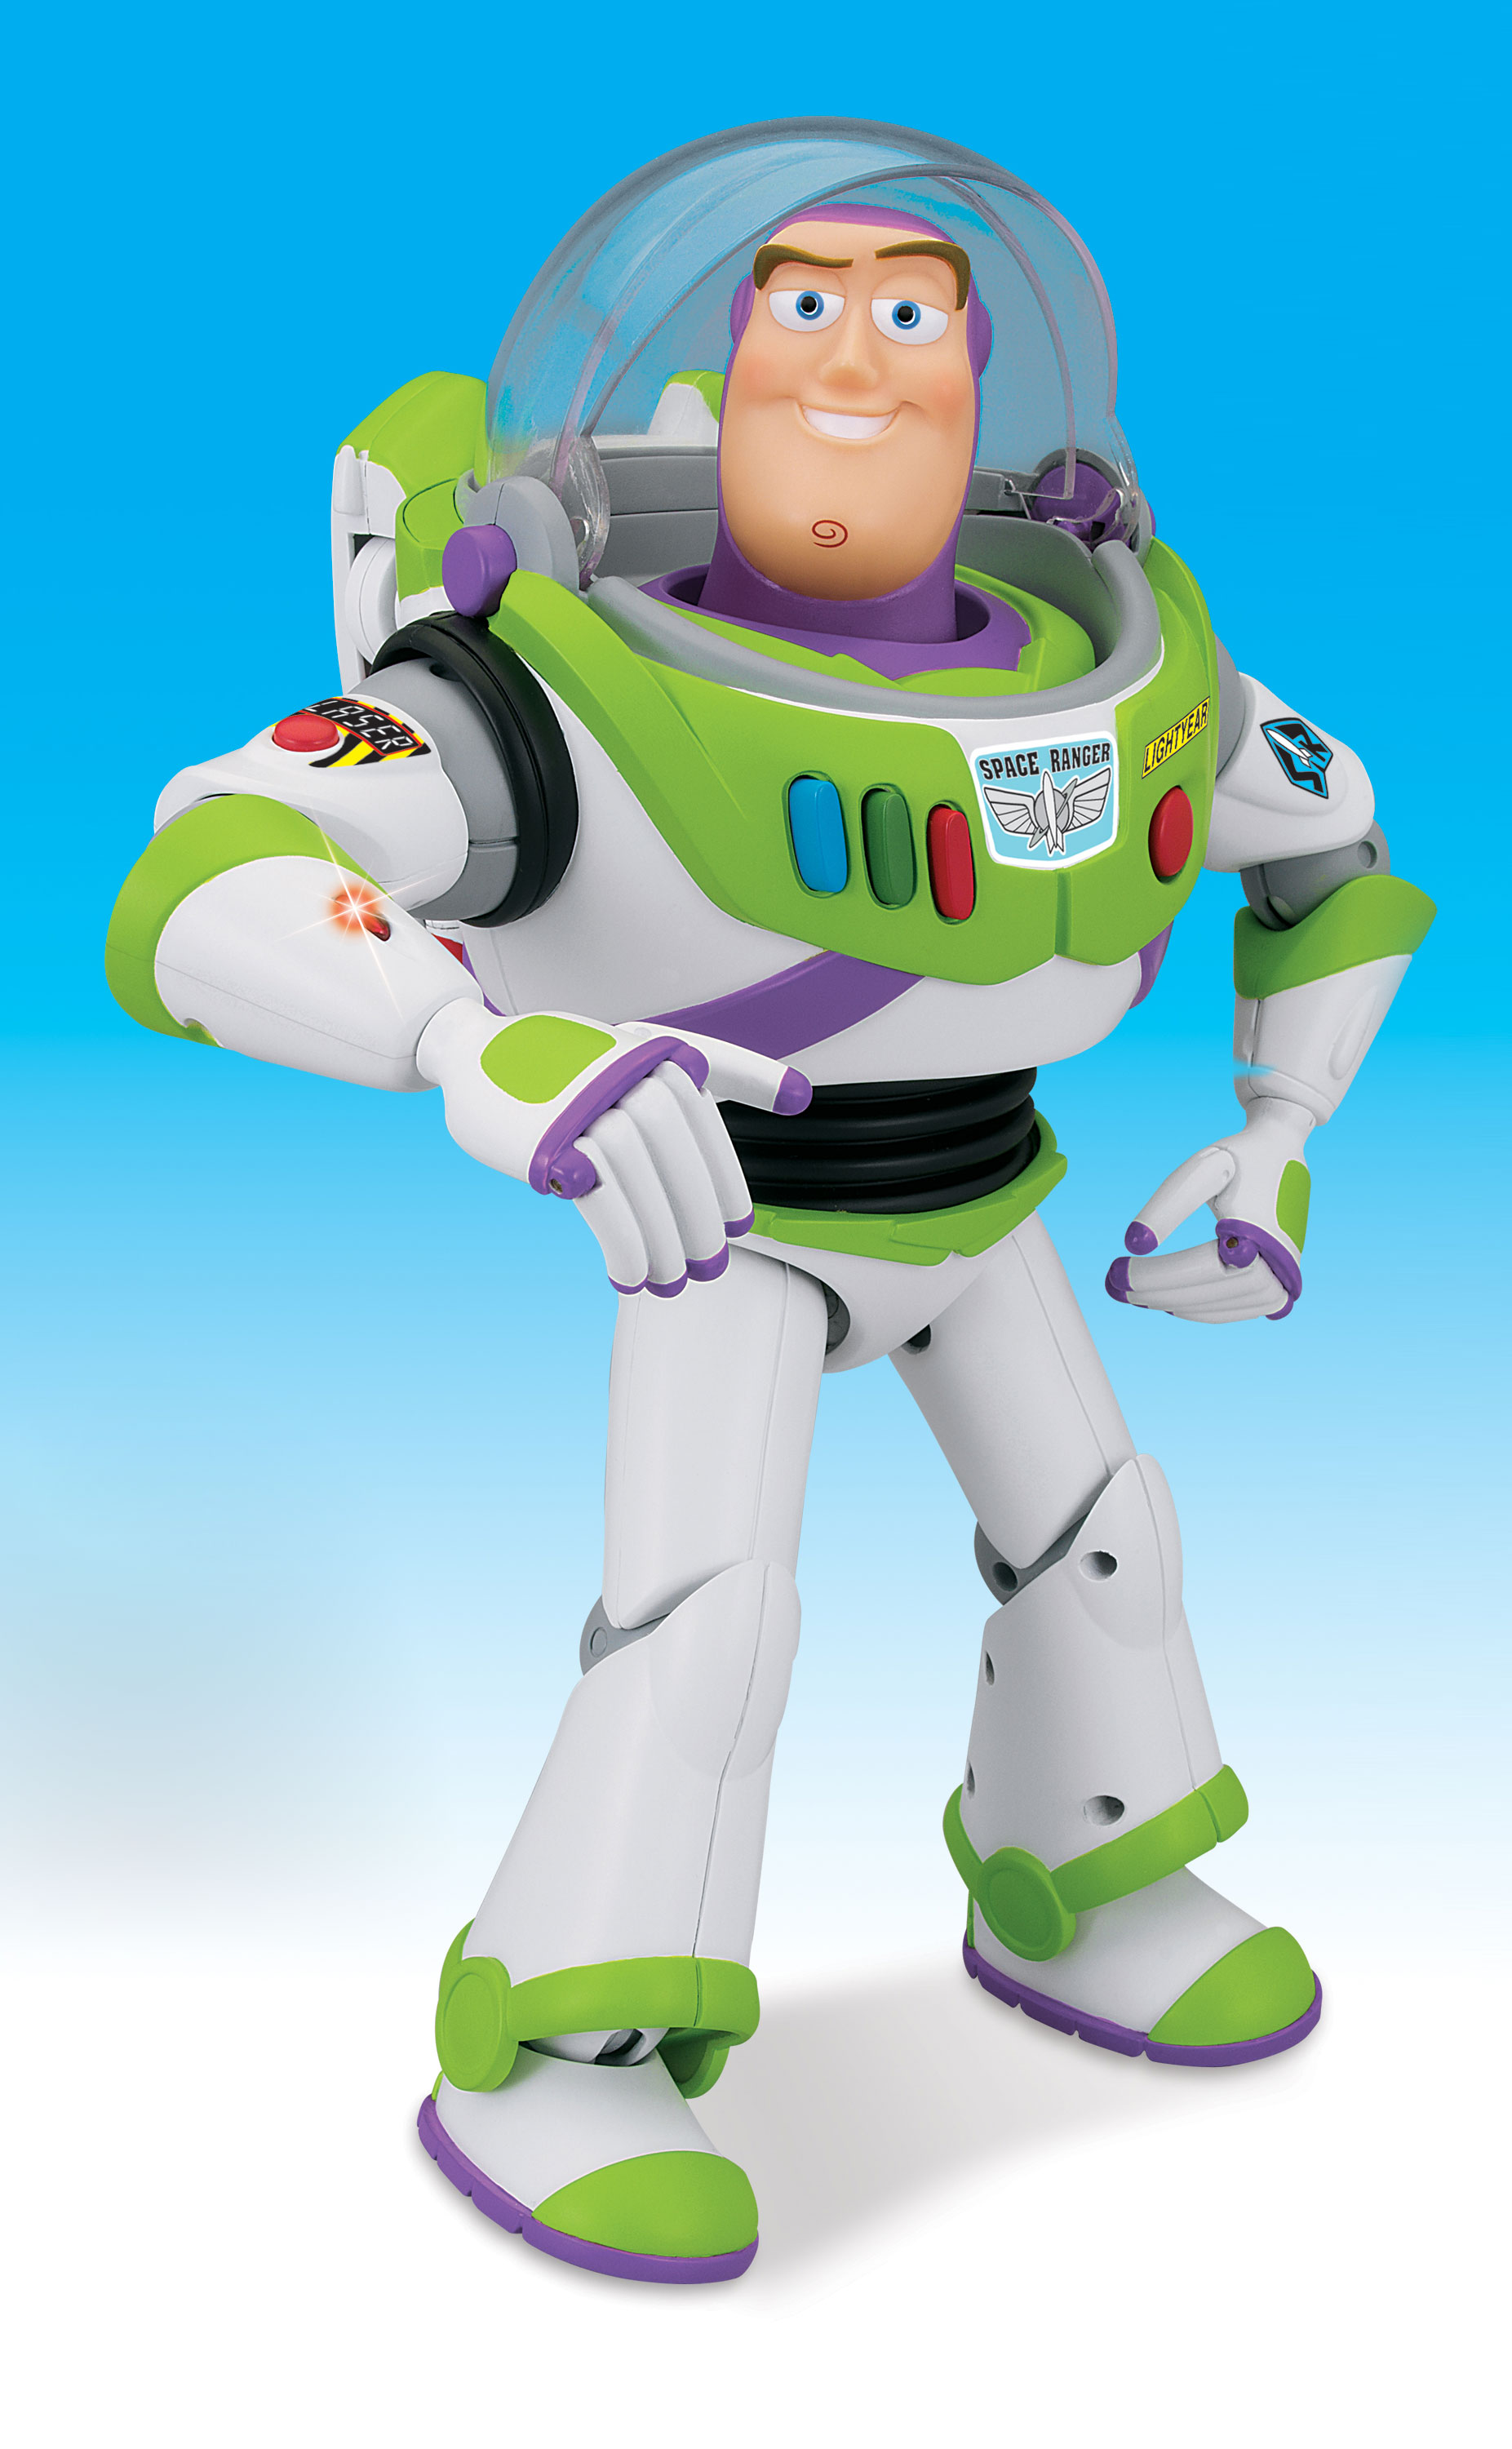 12 Buzz Lightyear Is Straight Out Of The Movie - Buzz De Toy Story - HD Wallpaper 